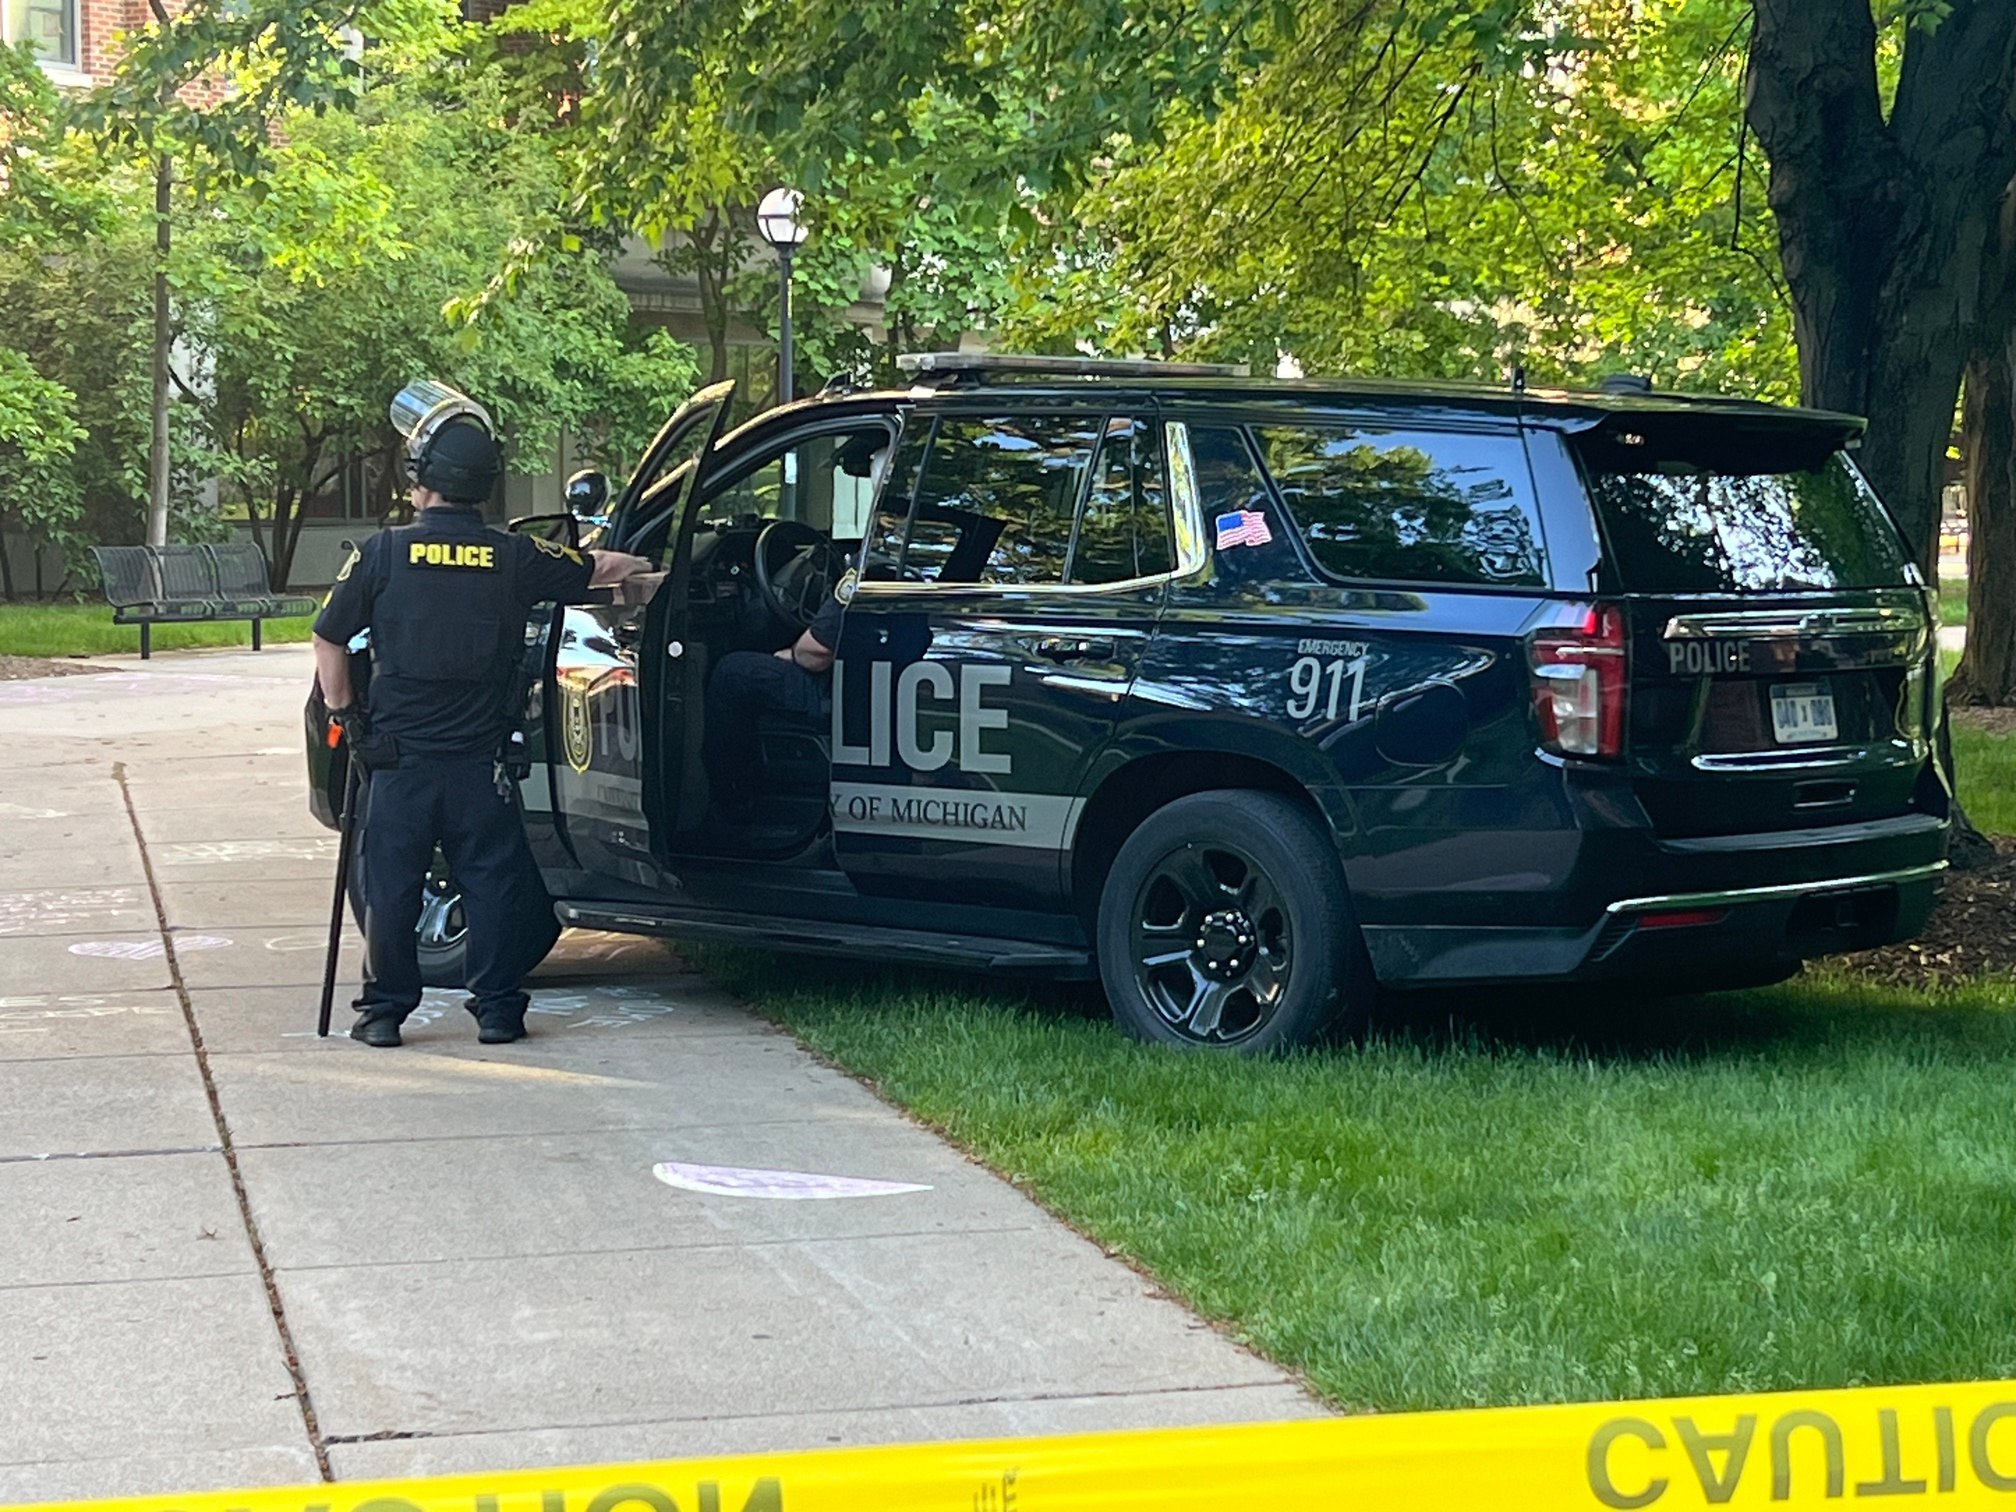 Police clear tent encampment at University of Michigan | New Detroit Zoo logo and water tower wrap is revealed | Ann Arbor Public Schools cutting staff and curriculum